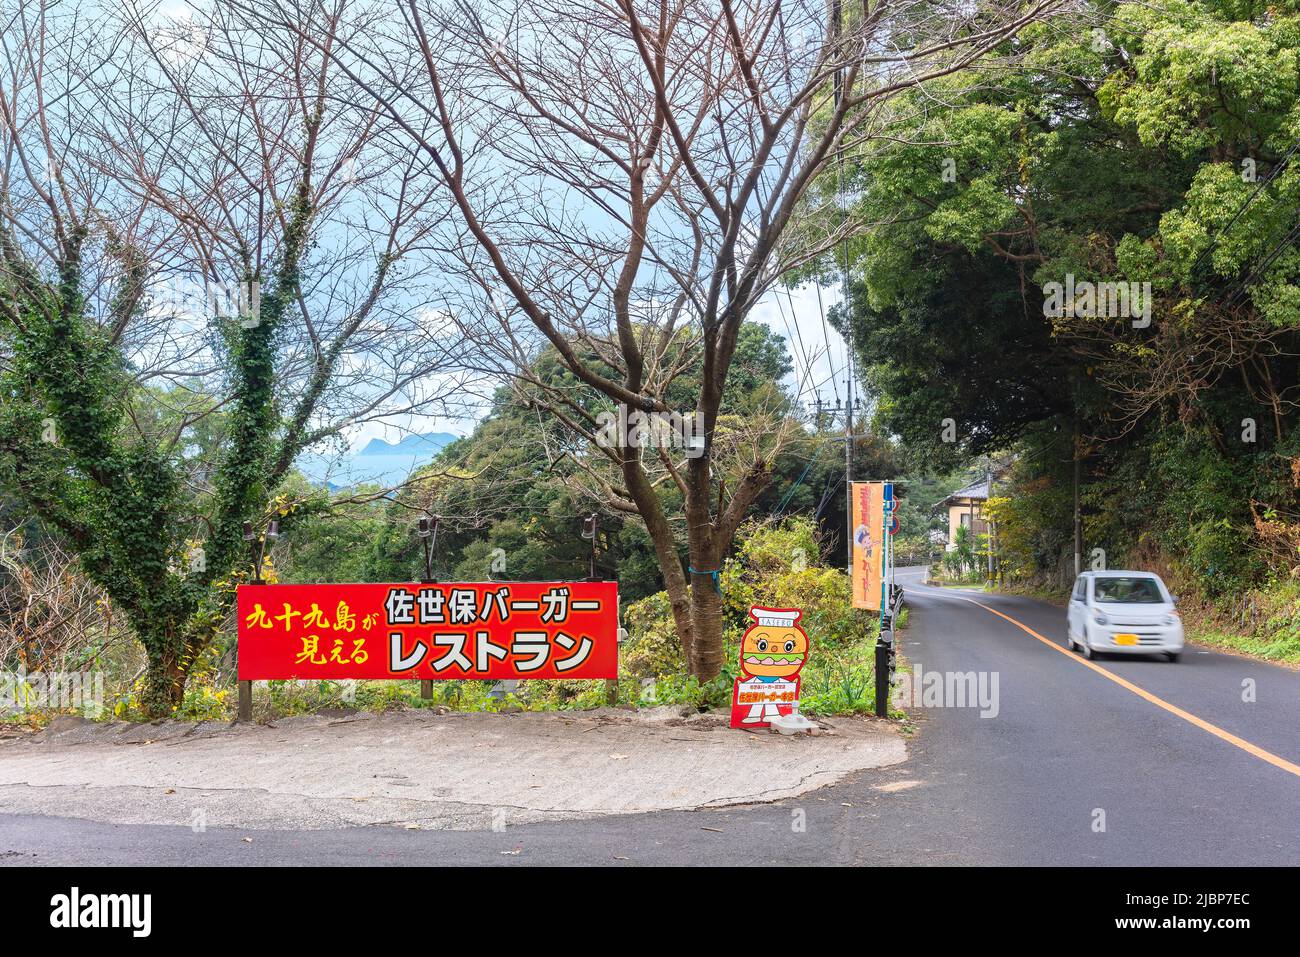 kyushu, japan - december 09 2021: Panel and mascot aside the road leading to a famous Sasebo Burger restaurant in Saikai National Park overlooking the Stock Photo